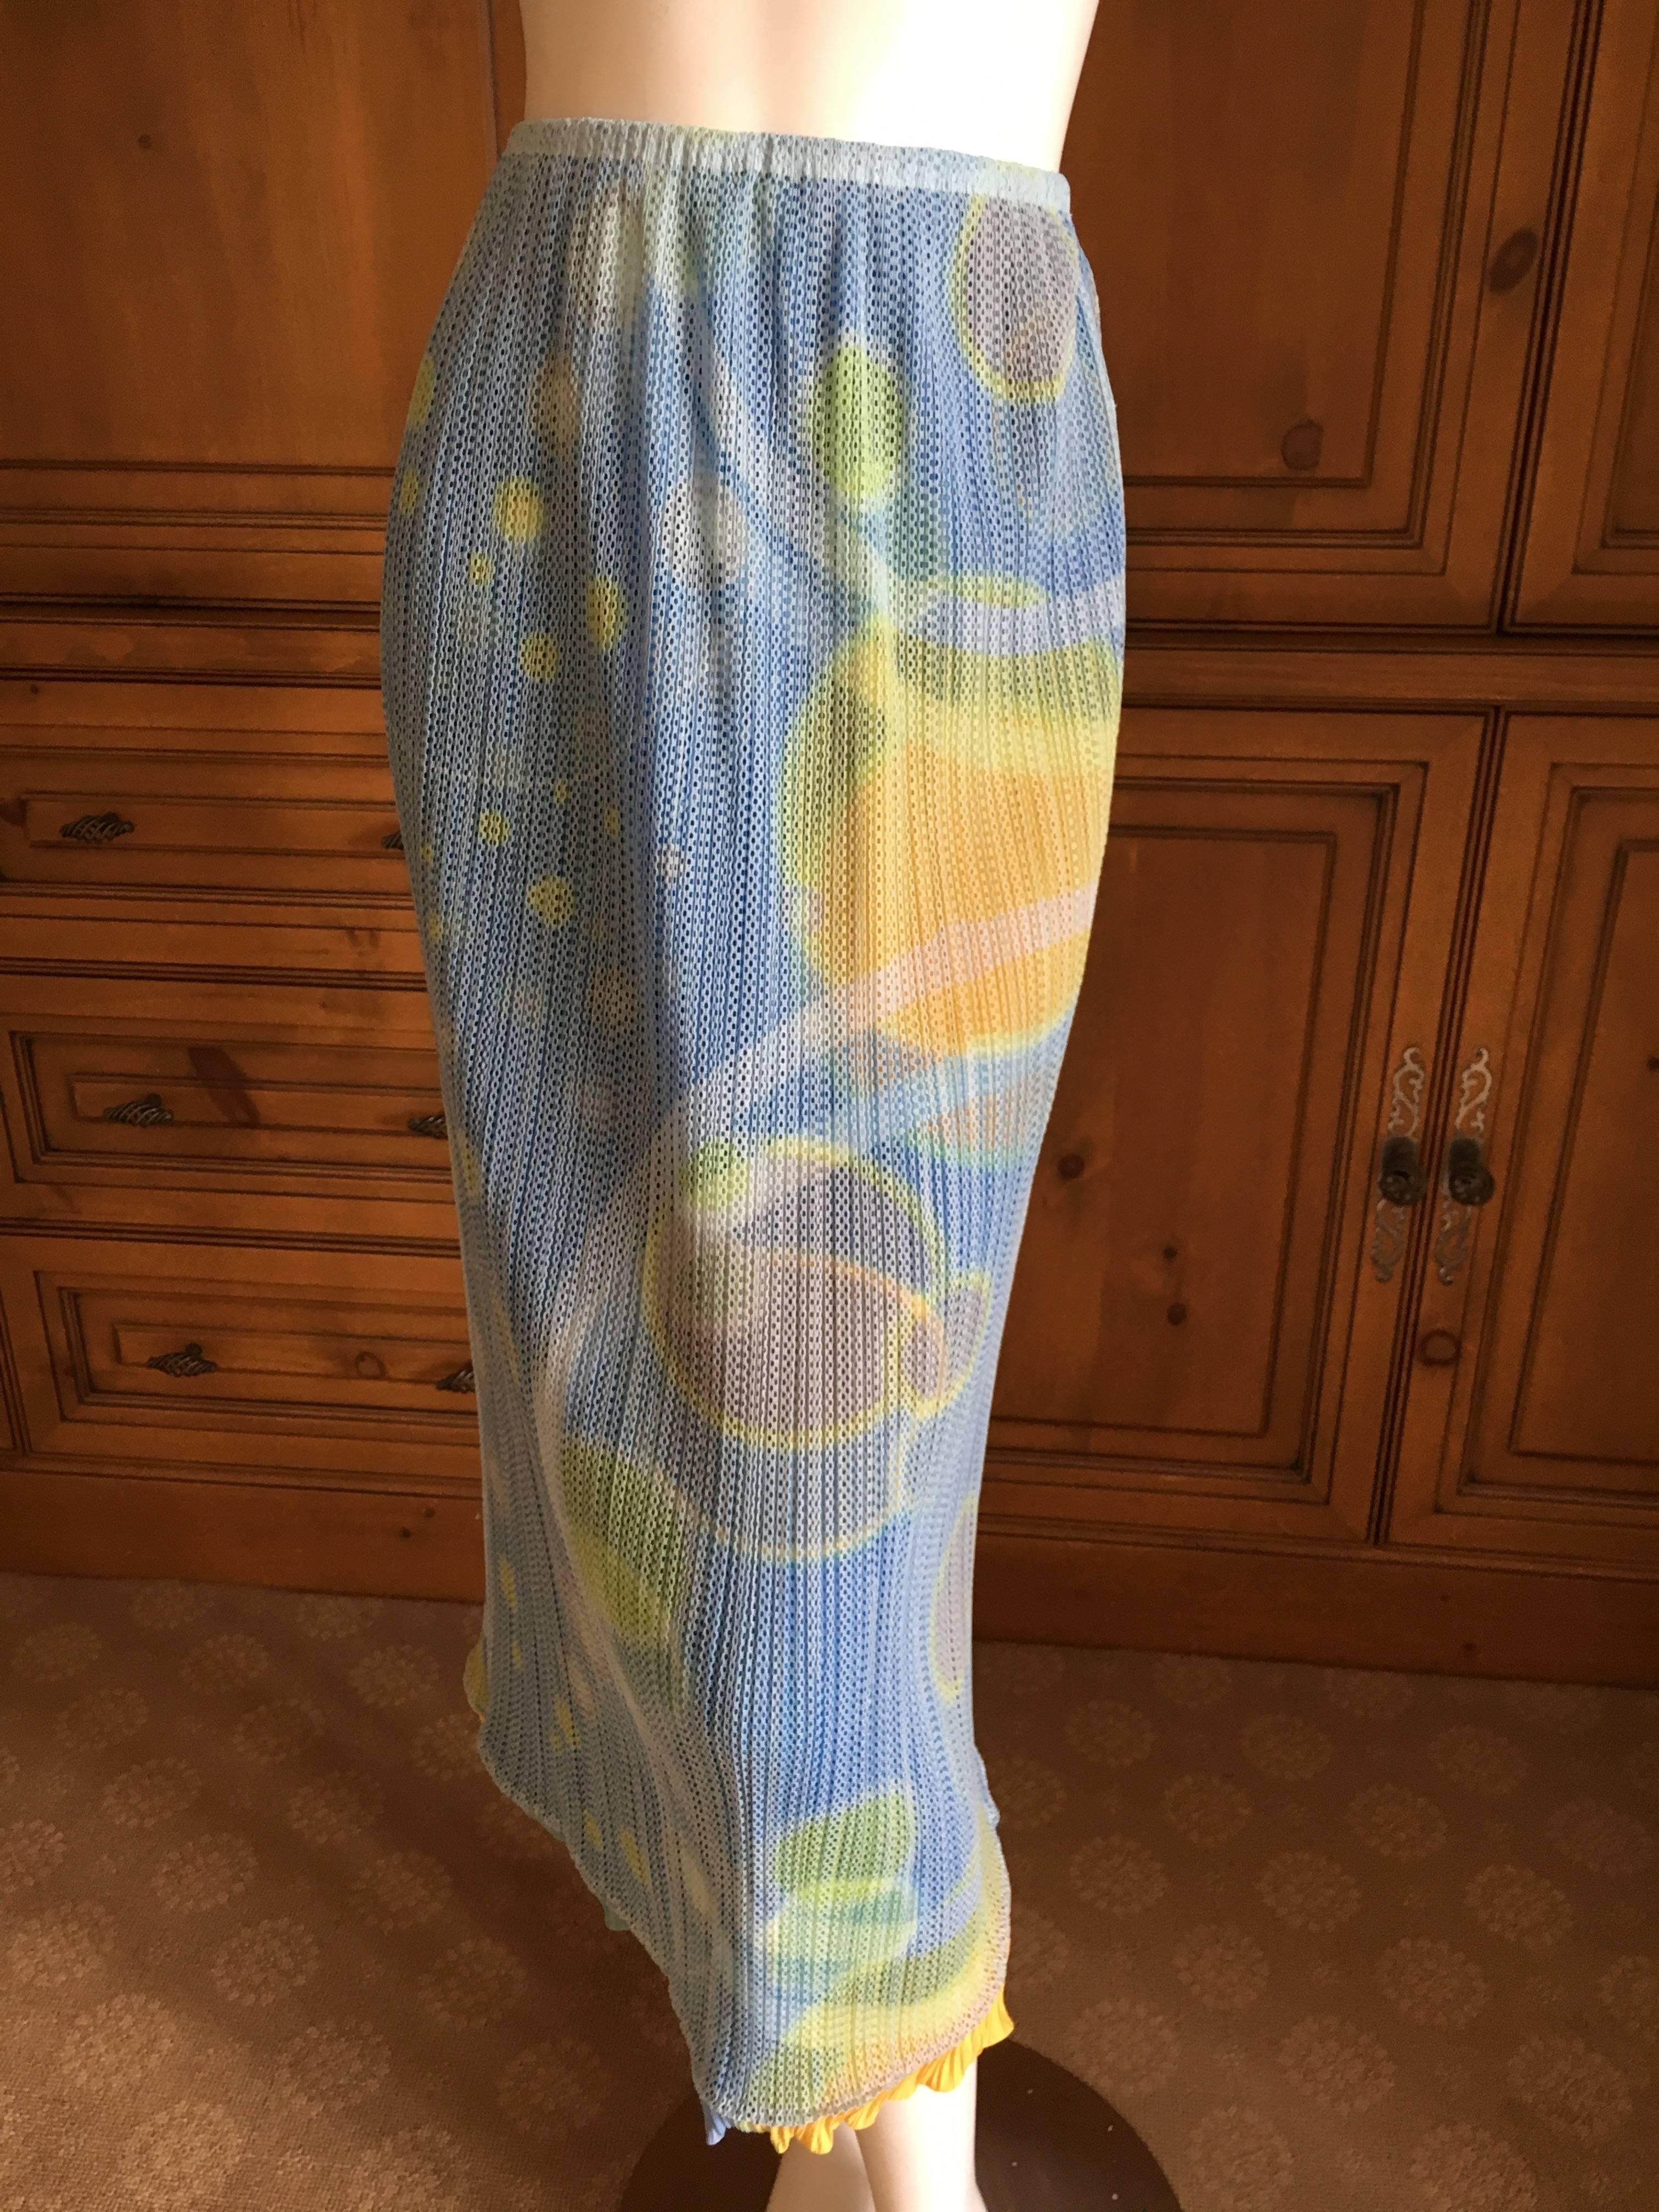 Issey Miyake Pleats Please Colorful Cosmos Skirt In Excellent Condition For Sale In Cloverdale, CA